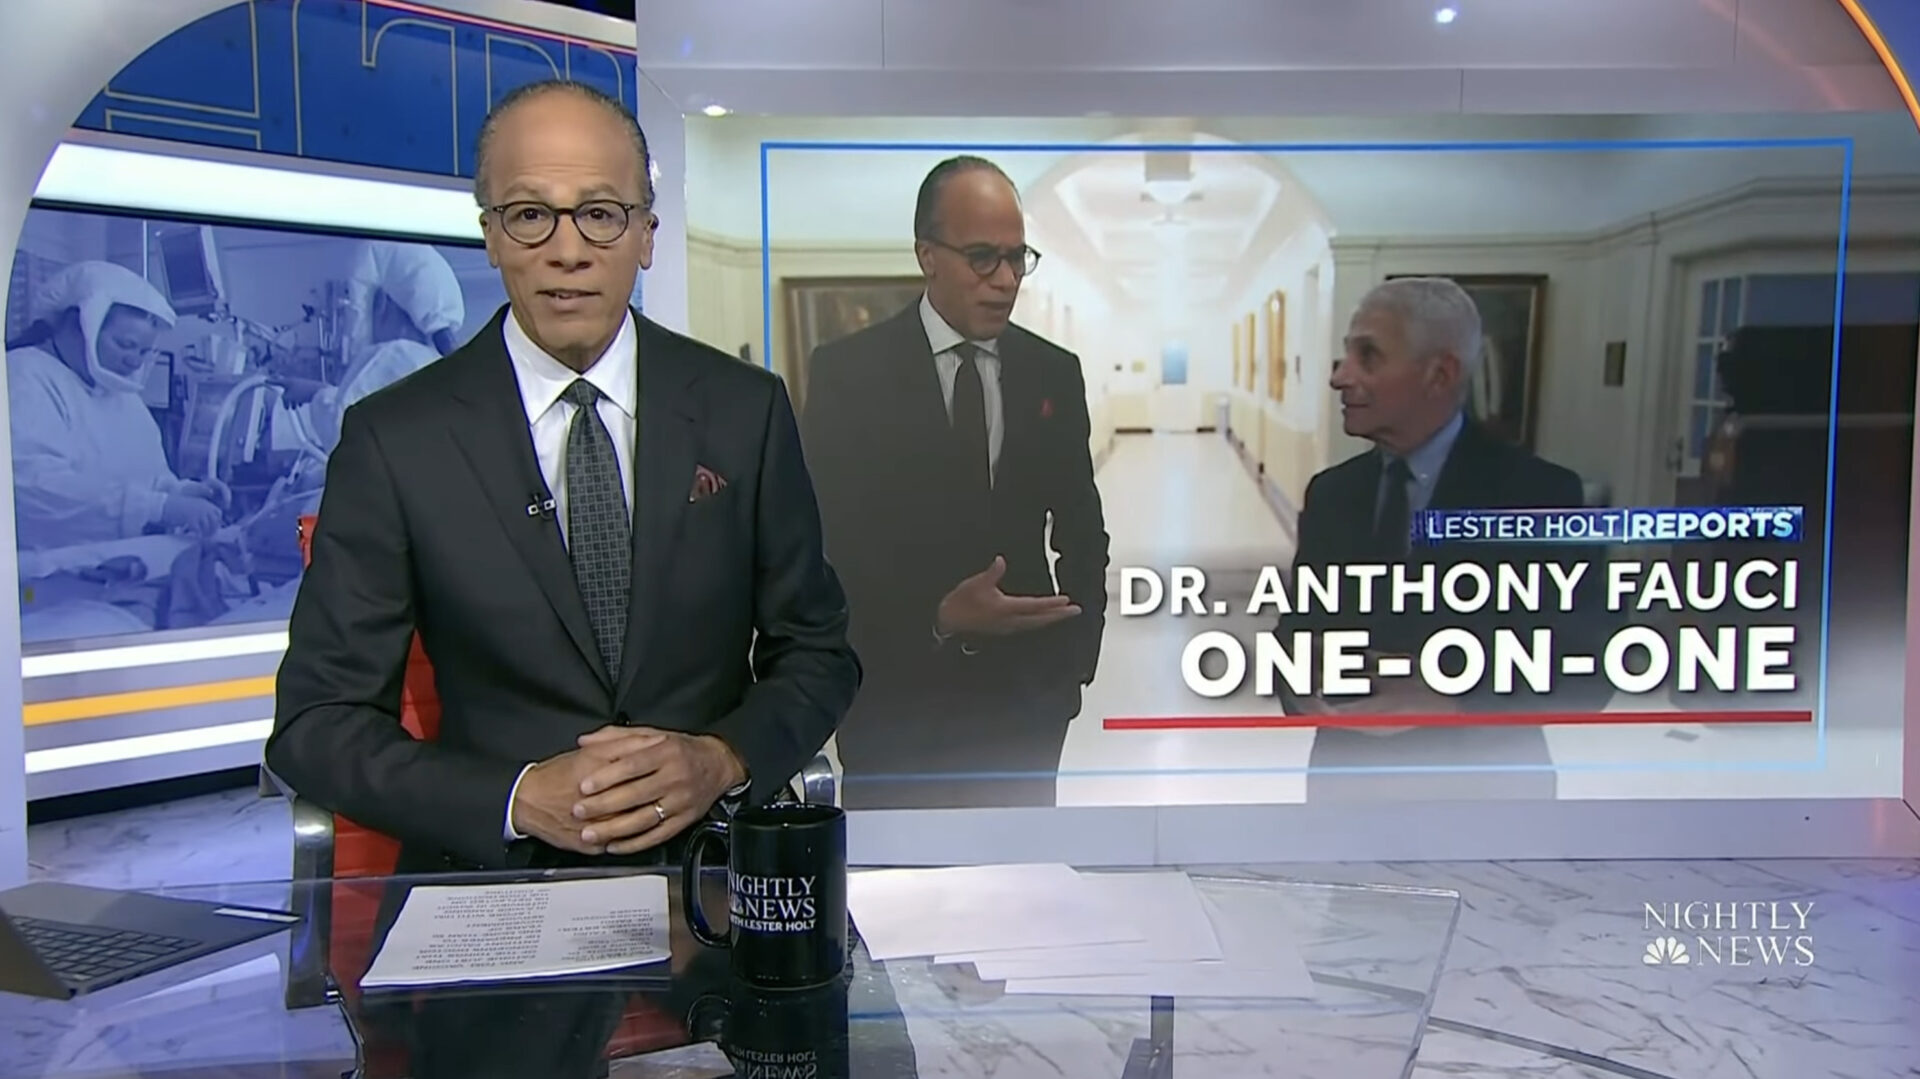 Dr. Anthony Fauci one-on-one